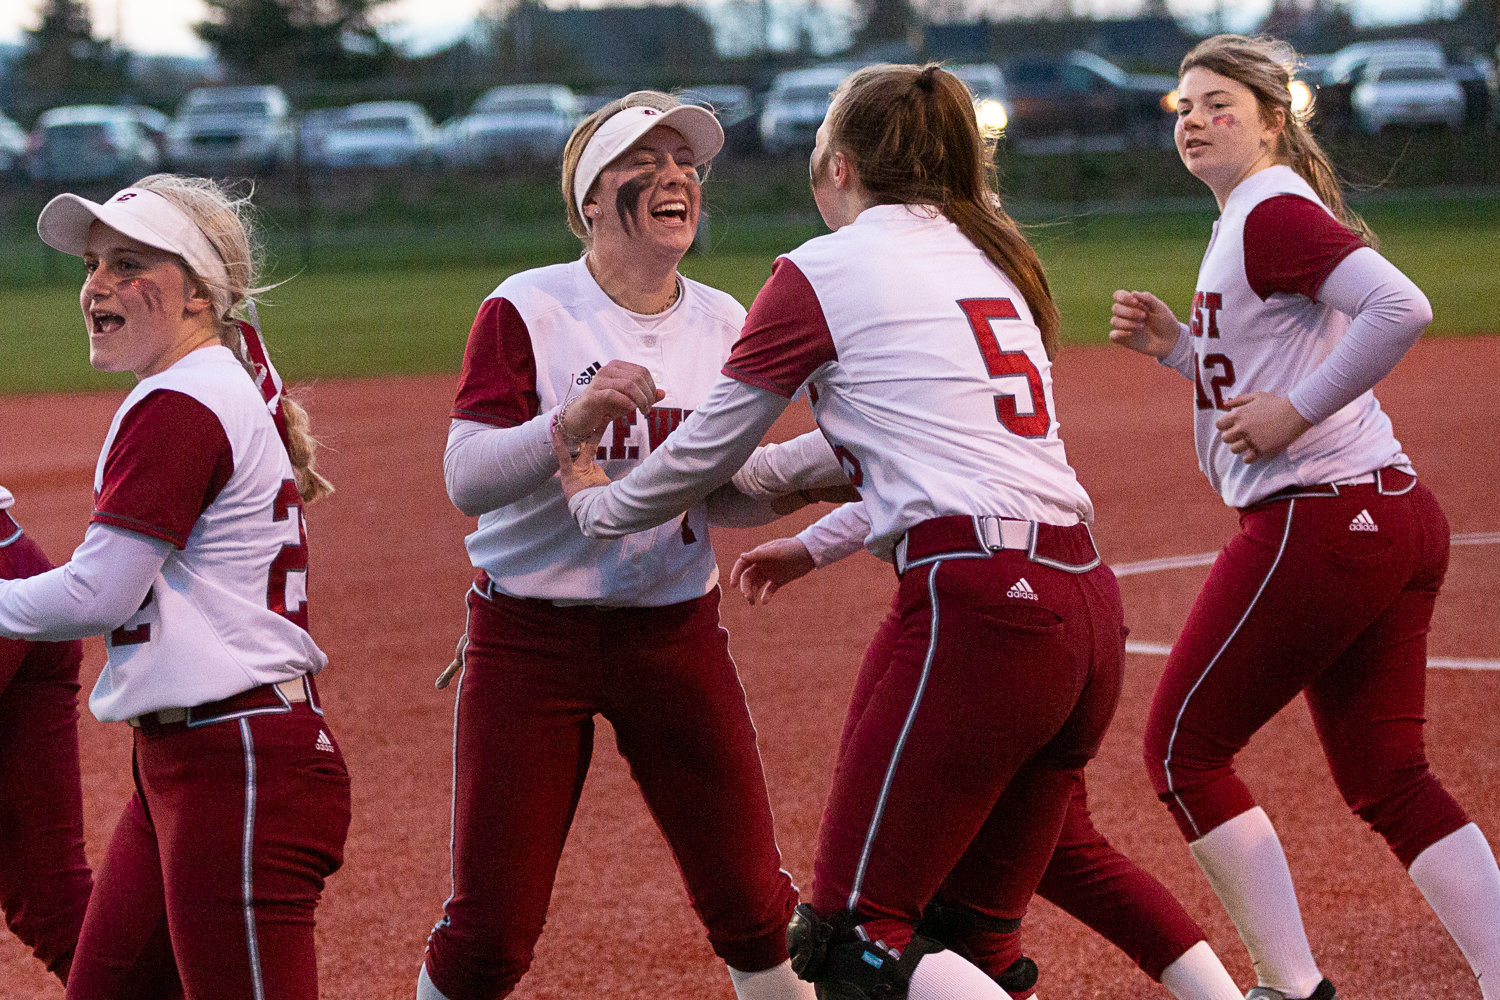 Lena Fragner and Rachel Gray celebrate after W.F. West's 3-2 win over Tumwater on March 22 at Rec Park.